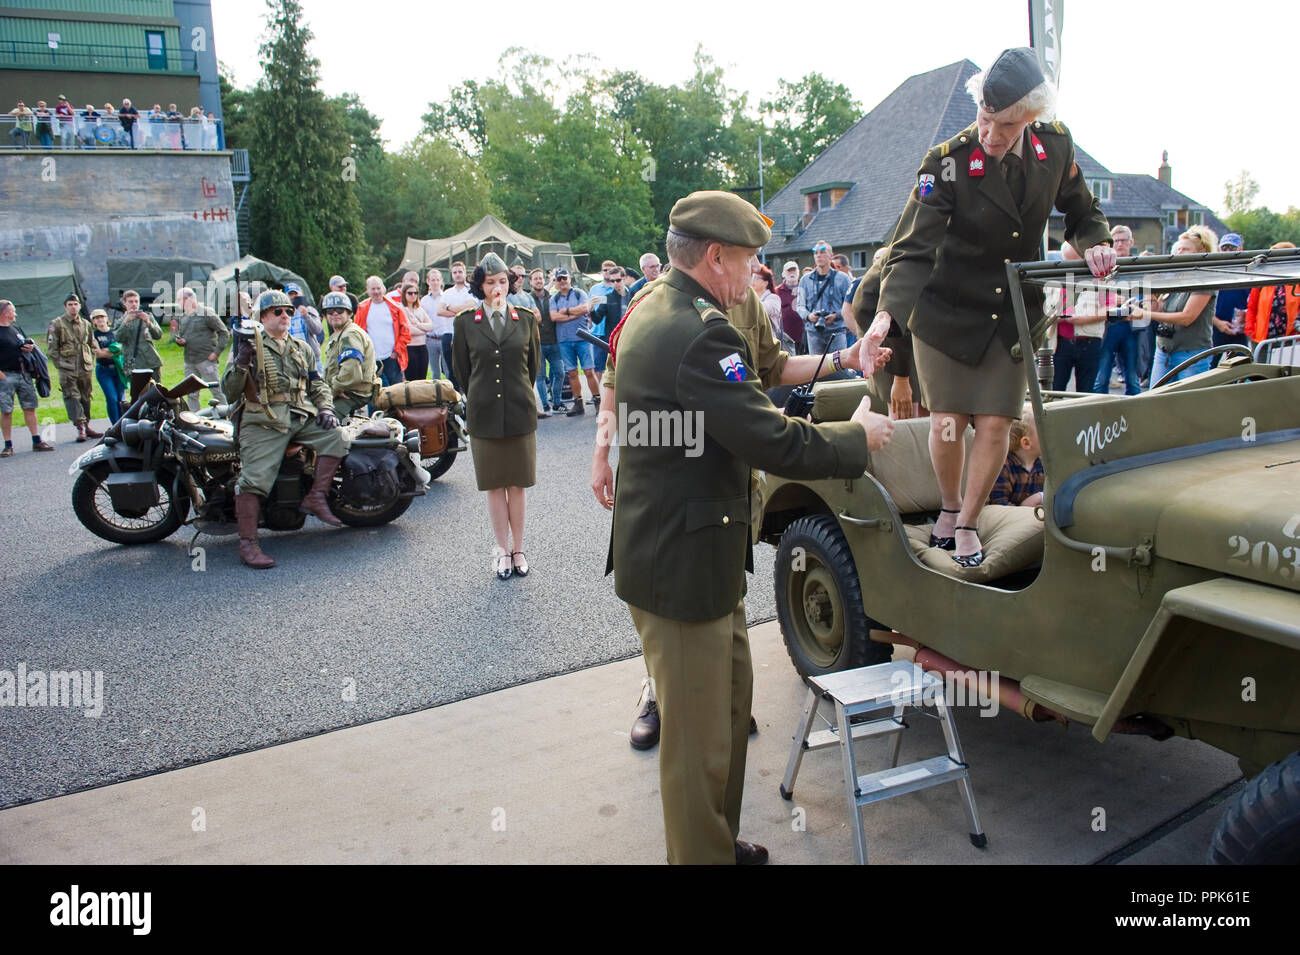 ENSCHEDE, THE NETHERLANDS - 01 SEPT, 2018: A singer from 'Sgt. Wilson's army show' stepping out of a jeep during a military army show. Stock Photo